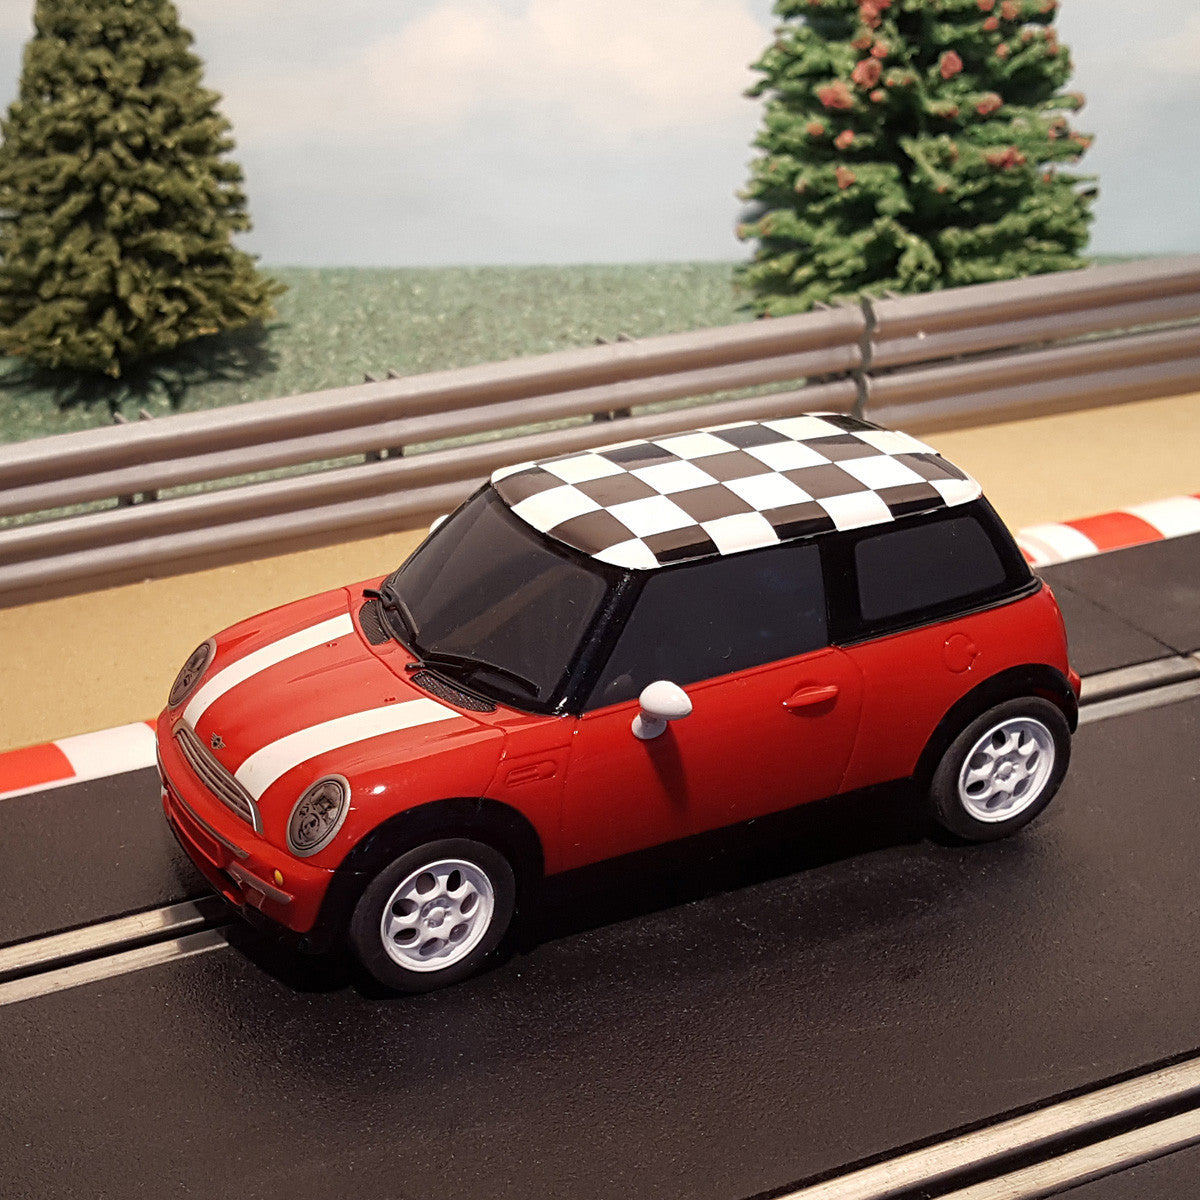 Scalextric 1:32 Digital Car - Red Mini Cooper With Chequered Roof